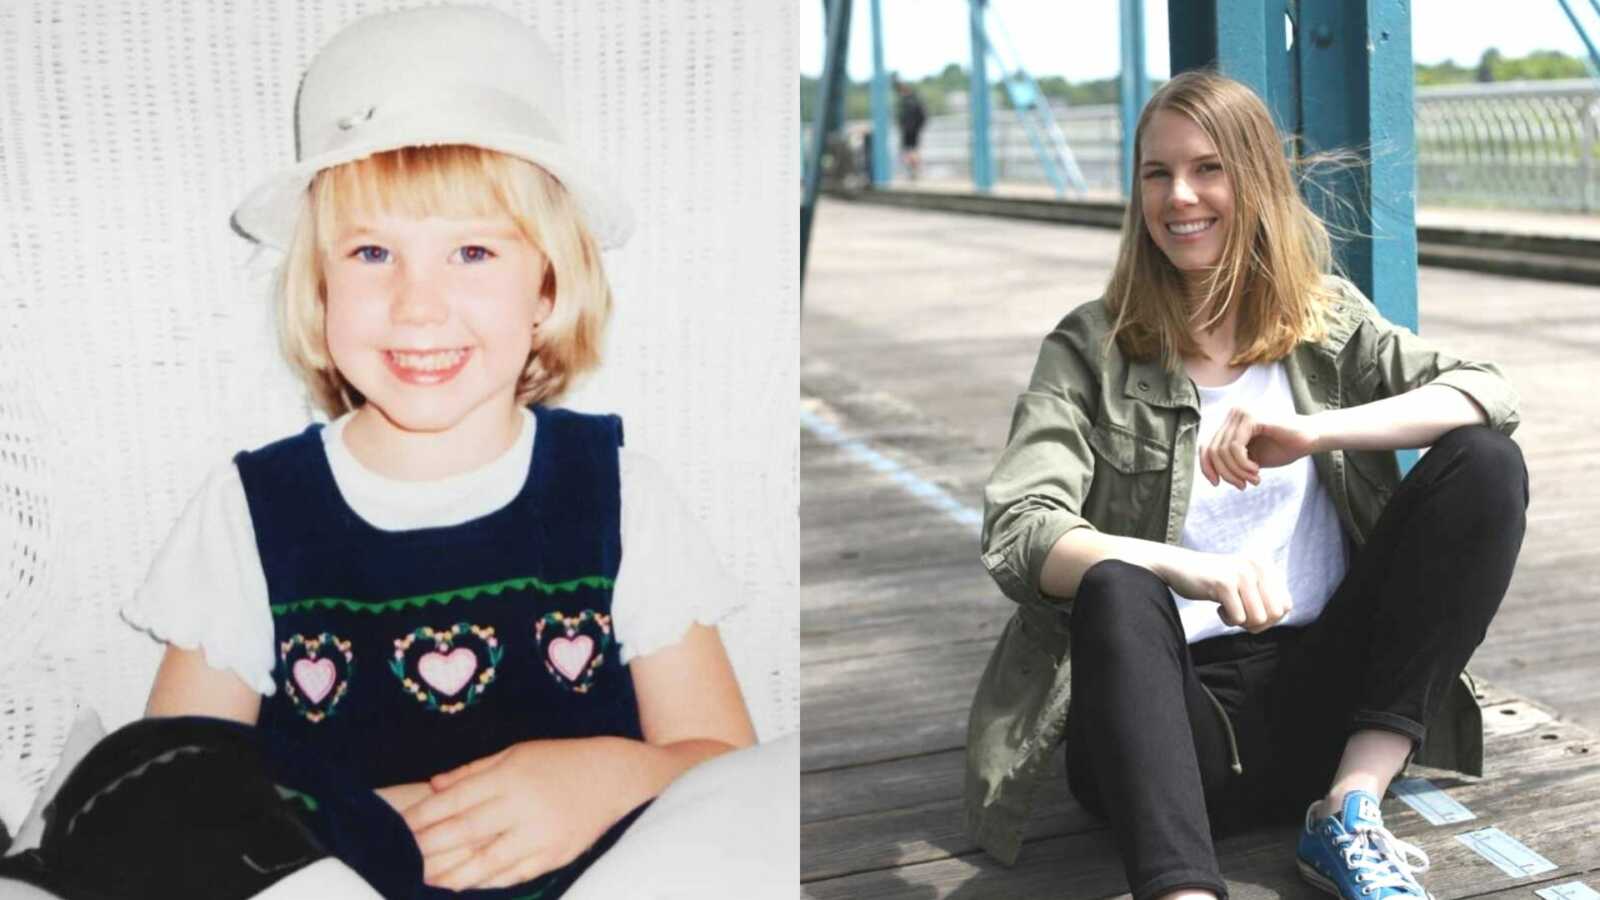 A young girl in white hat and an eating disorder survivor